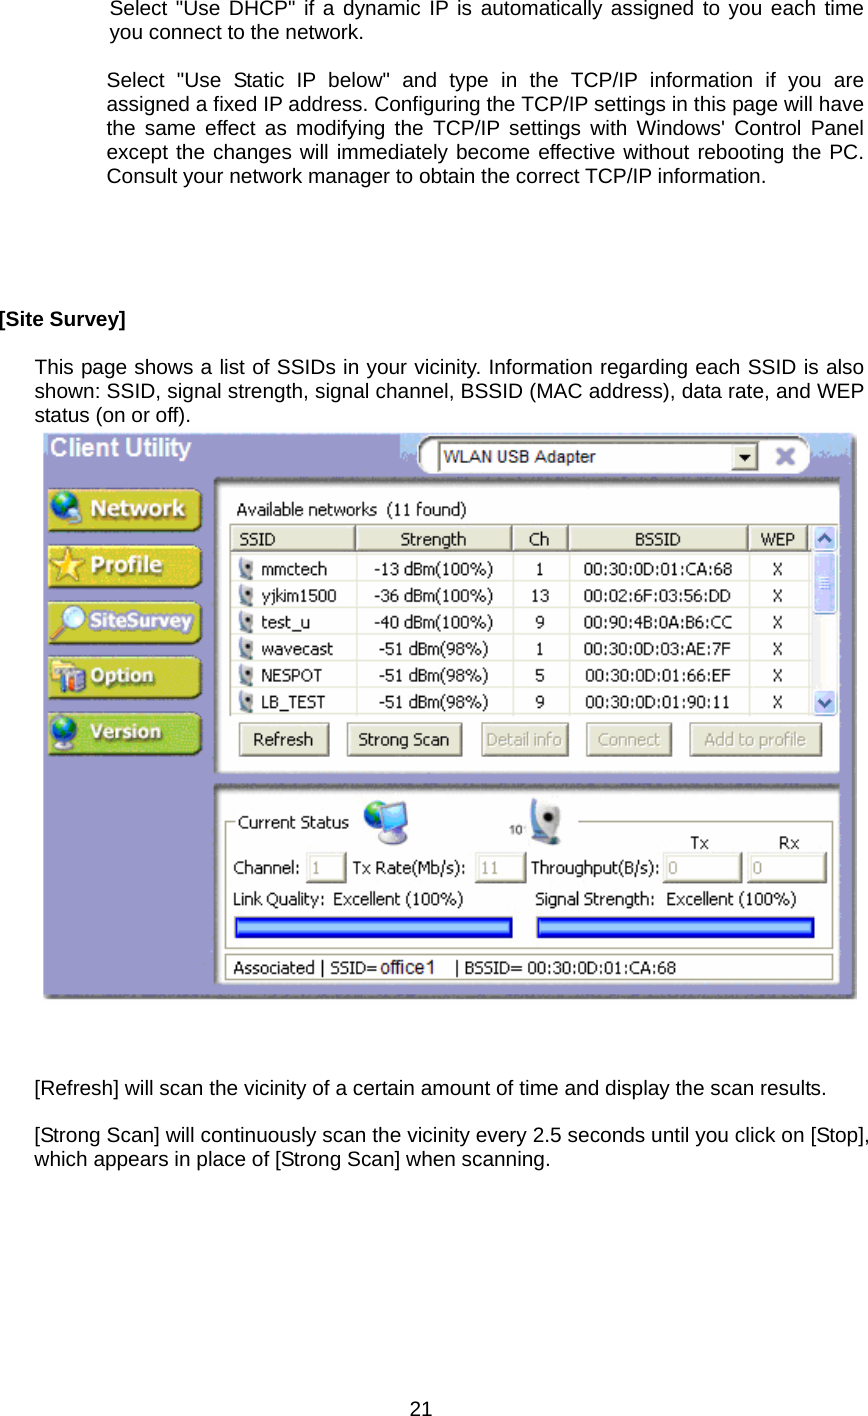      Select &quot;Use DHCP&quot; if a dynamic IP is automatically assigned to you each time you connect to the network.  Select &quot;Use Static IP below&quot; and type in the TCP/IP information if you are assigned a fixed IP address. Configuring the TCP/IP settings in this page will have the same effect as modifying the TCP/IP settings with Windows&apos; Control Panel except the changes will immediately become effective without rebooting the PC. Consult your network manager to obtain the correct TCP/IP information.      [Site Survey]  This page shows a list of SSIDs in your vicinity. Information regarding each SSID is also shown: SSID, signal strength, signal channel, BSSID (MAC address), data rate, and WEP status (on or off).         [Refresh] will scan the vicinity of a certain amount of time and display the scan results.  [Strong Scan] will continuously scan the vicinity every 2.5 seconds until you click on [Stop], which appears in place of [Strong Scan] when scanning.   21